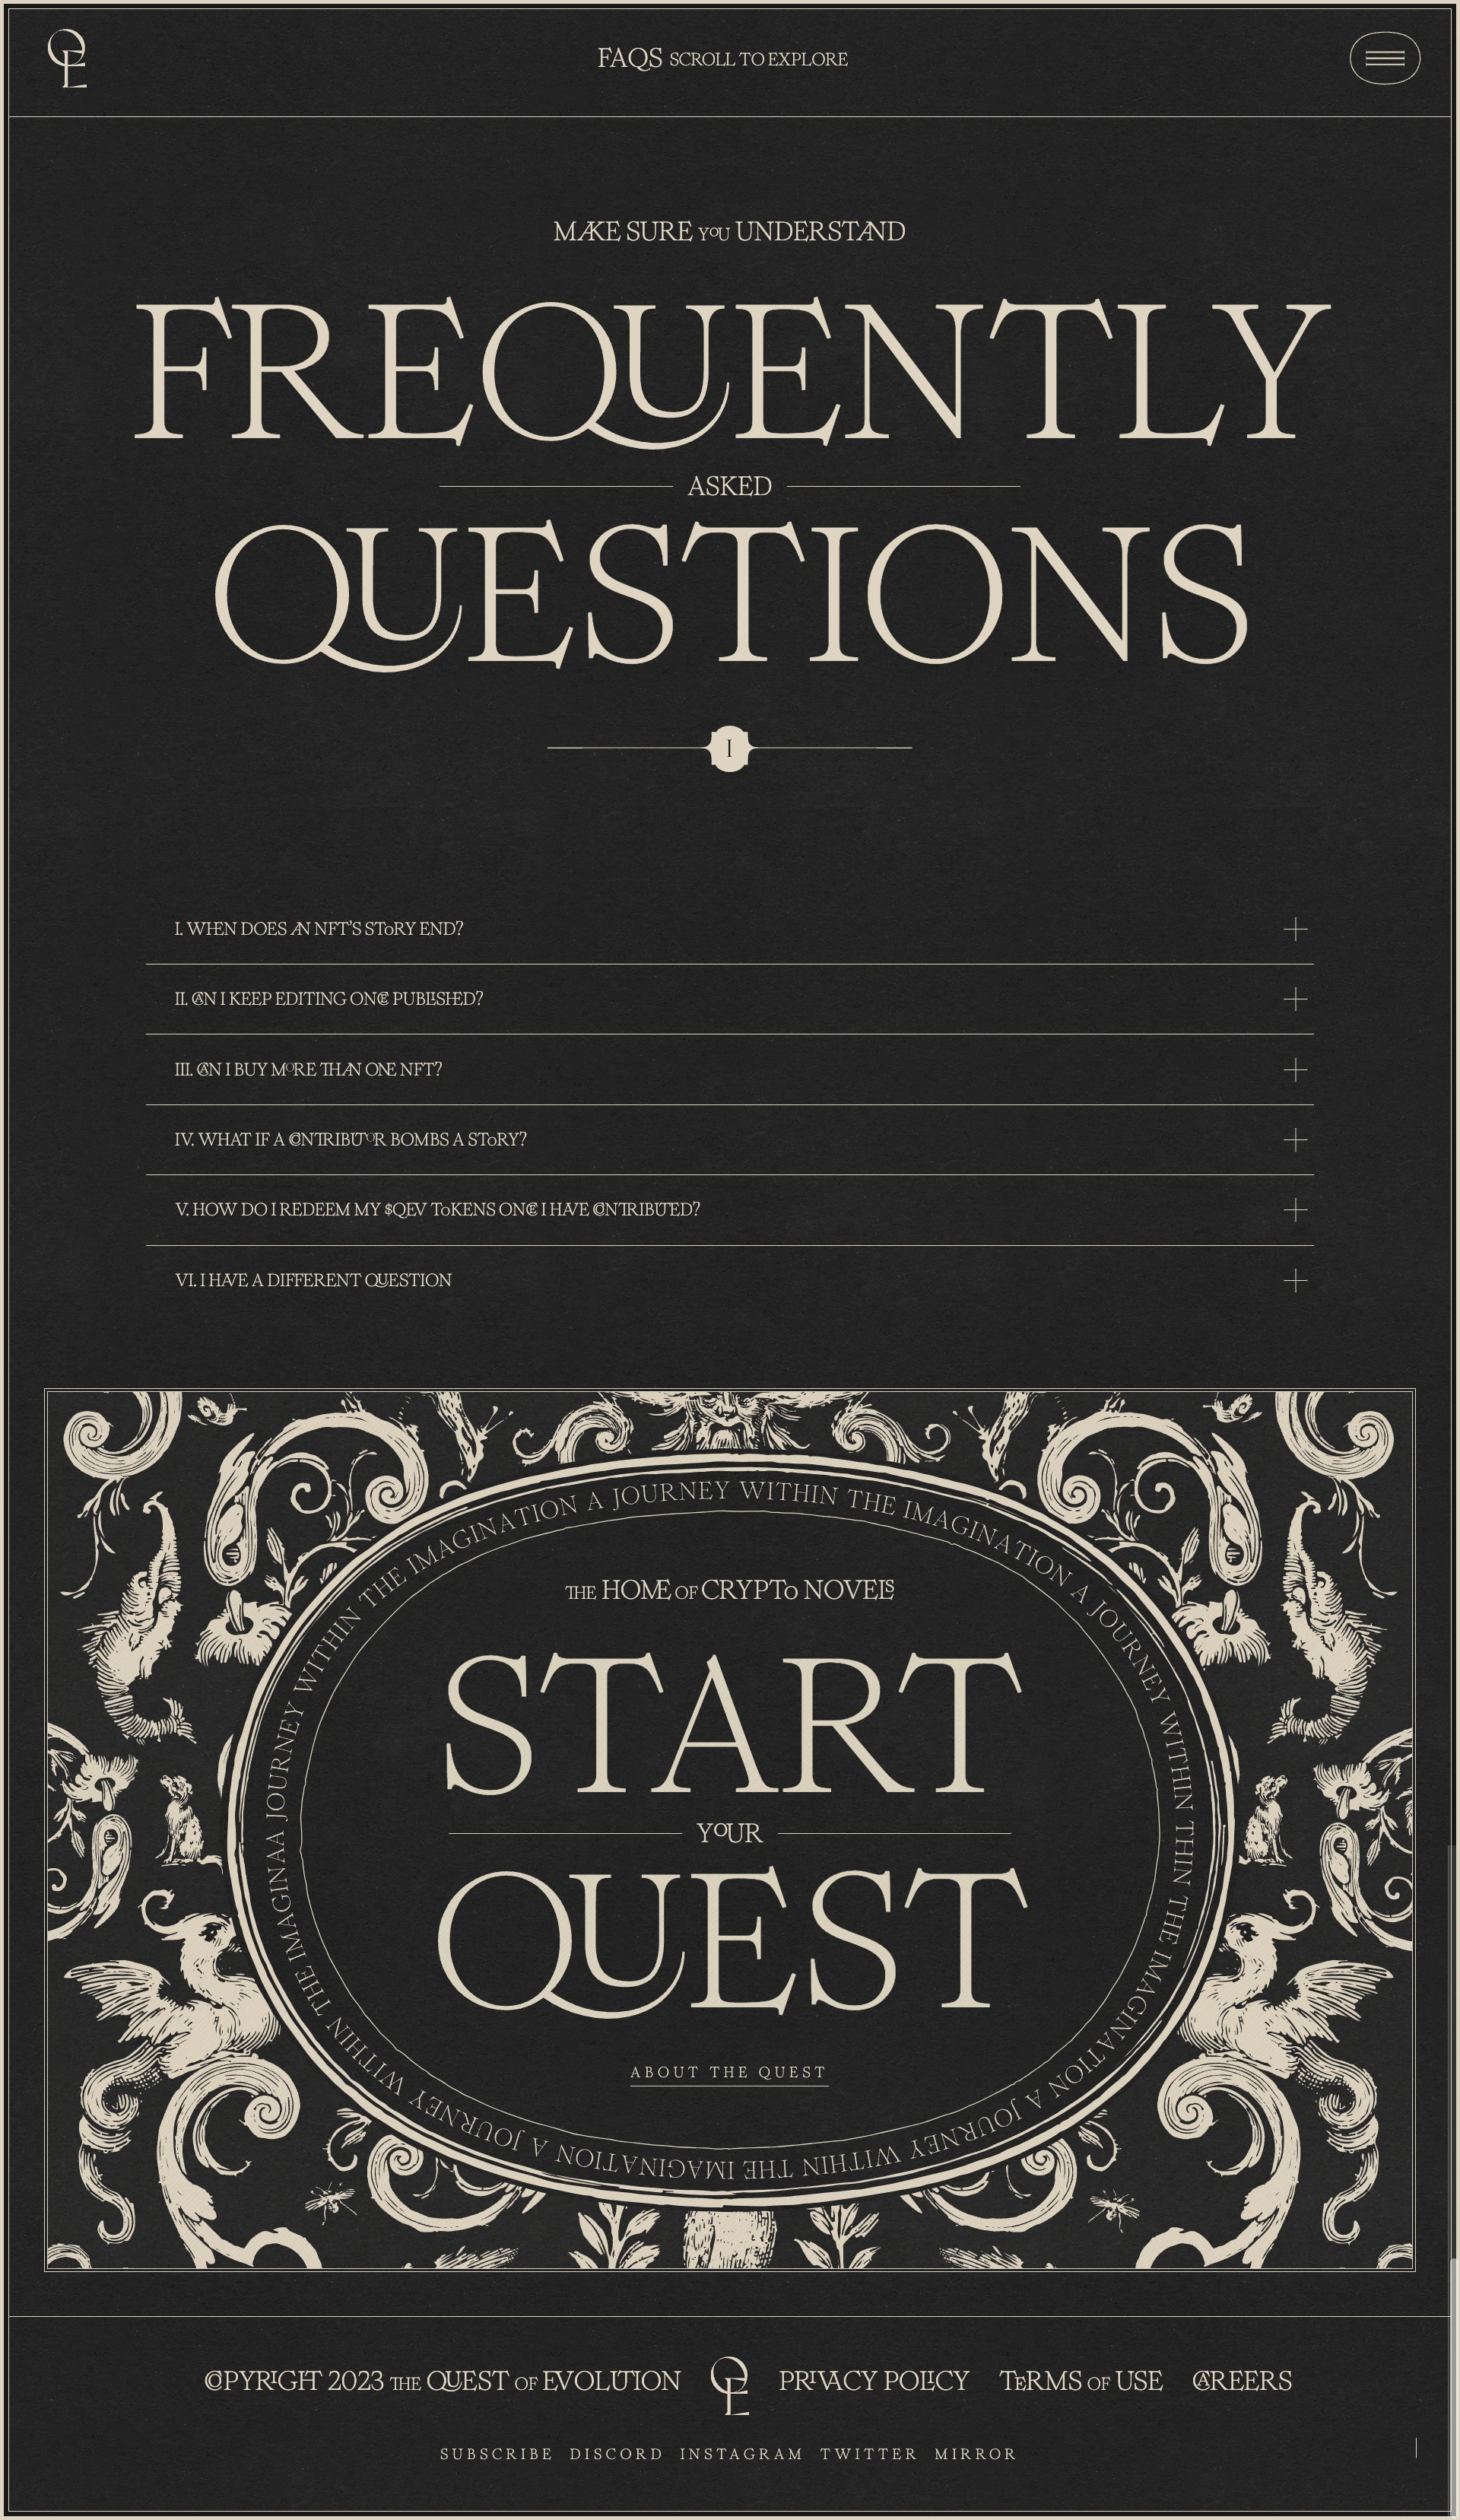 The Quest of Evolution Landing Page Example: Creative collaboration between talents. A web3 platform for creative talents collaborating with each other to bring to life unique creative project ideas.